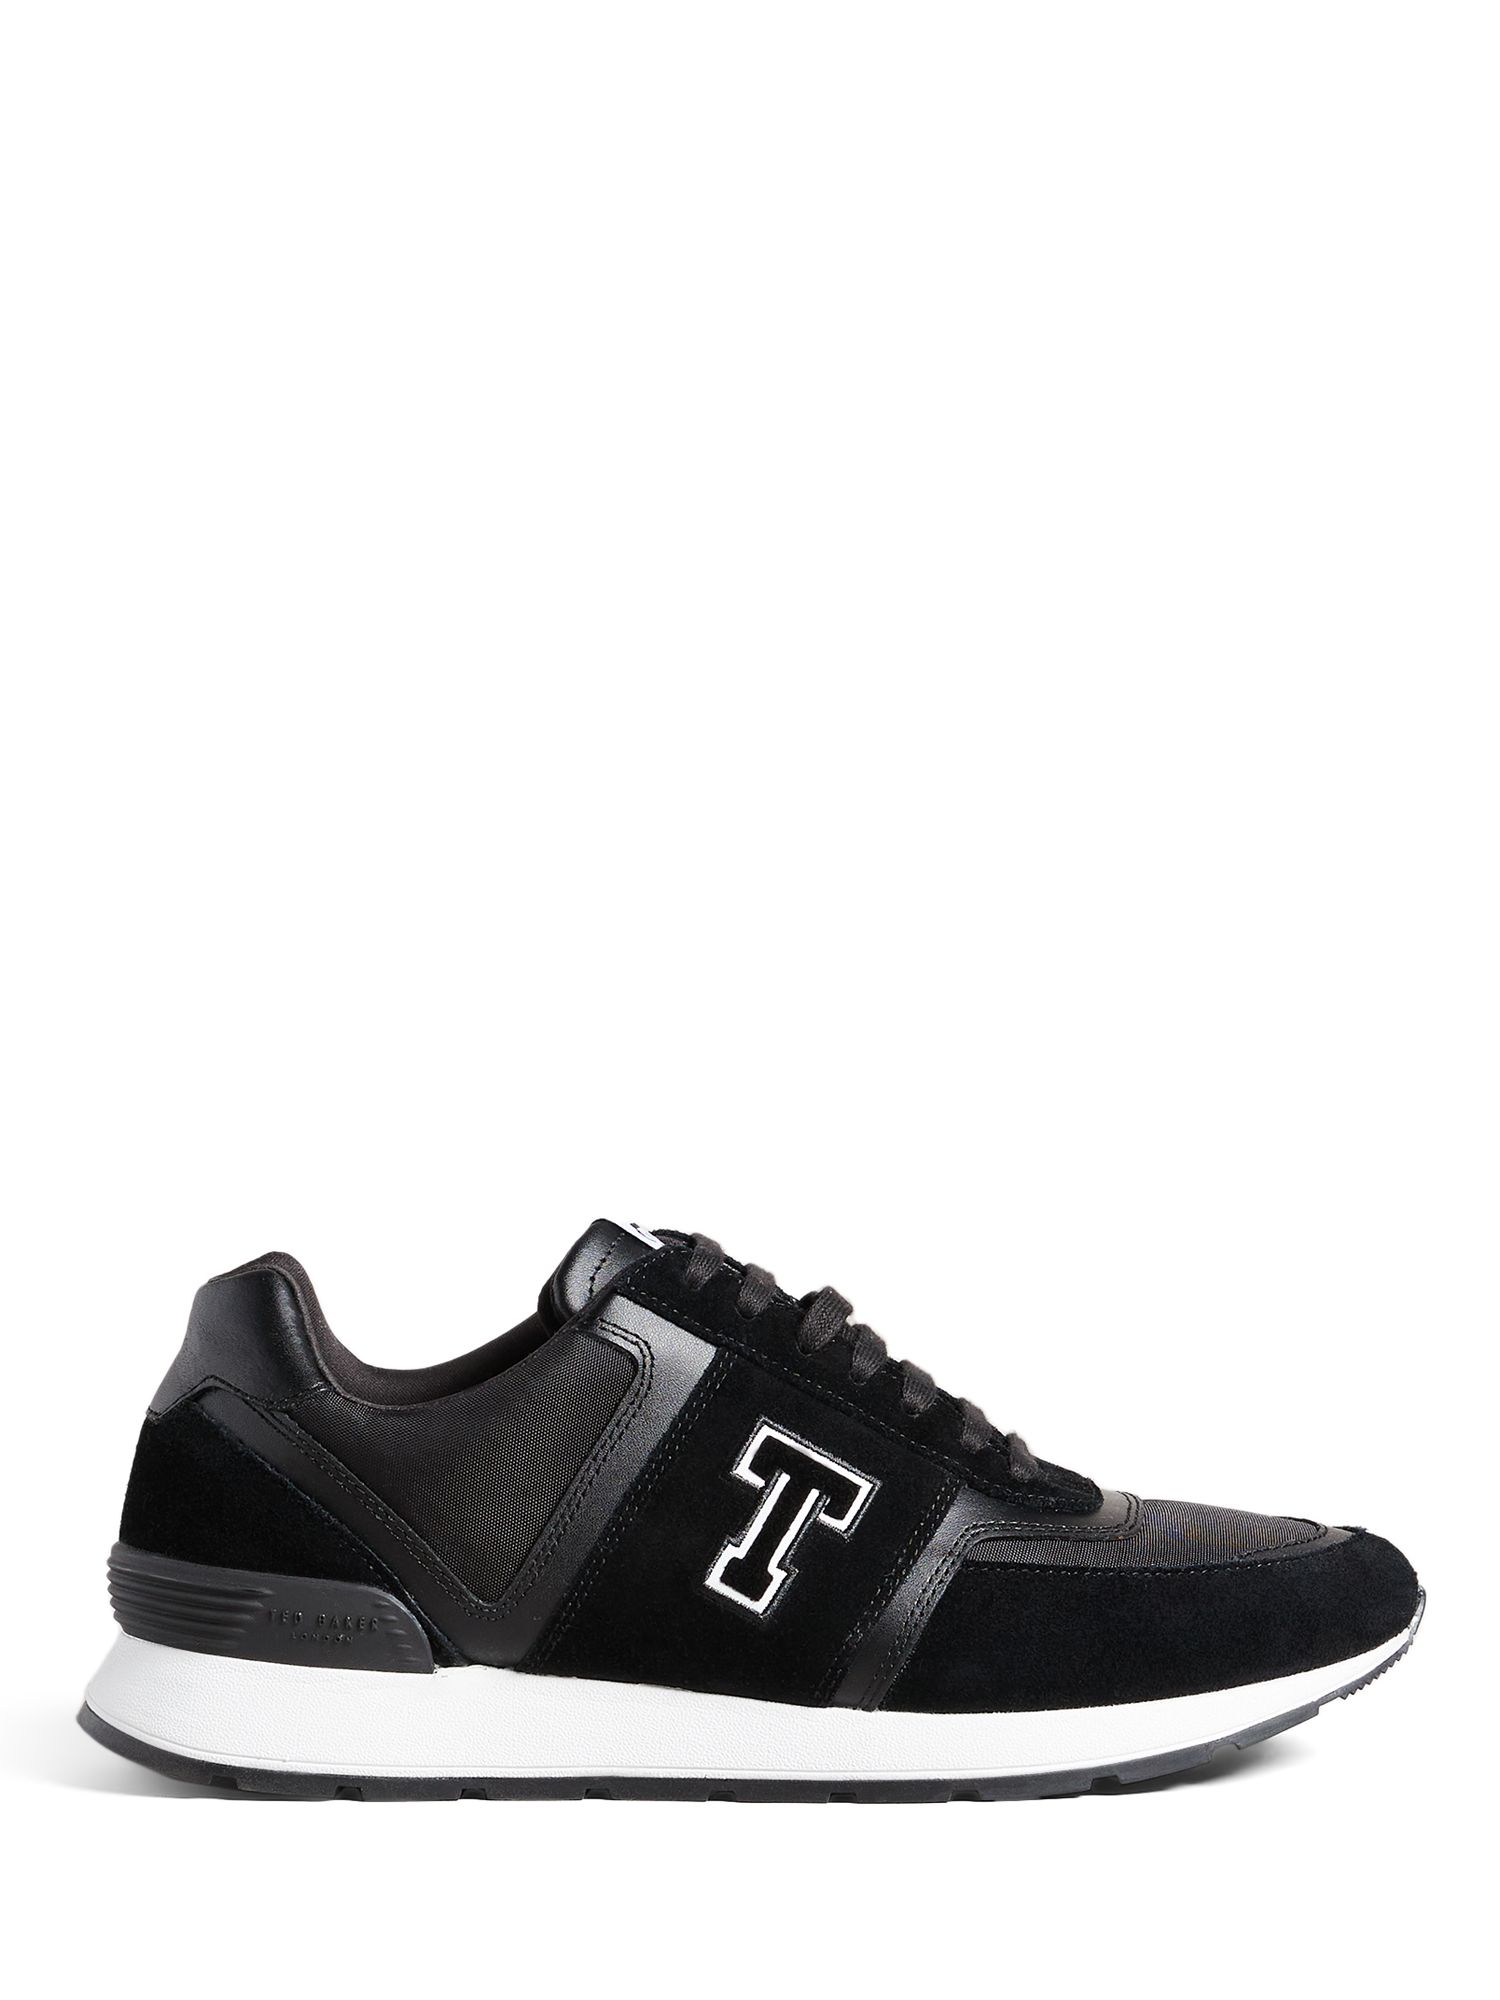 Ted Baker Gregory Lace Up Trainers, Black at John Lewis & Partners